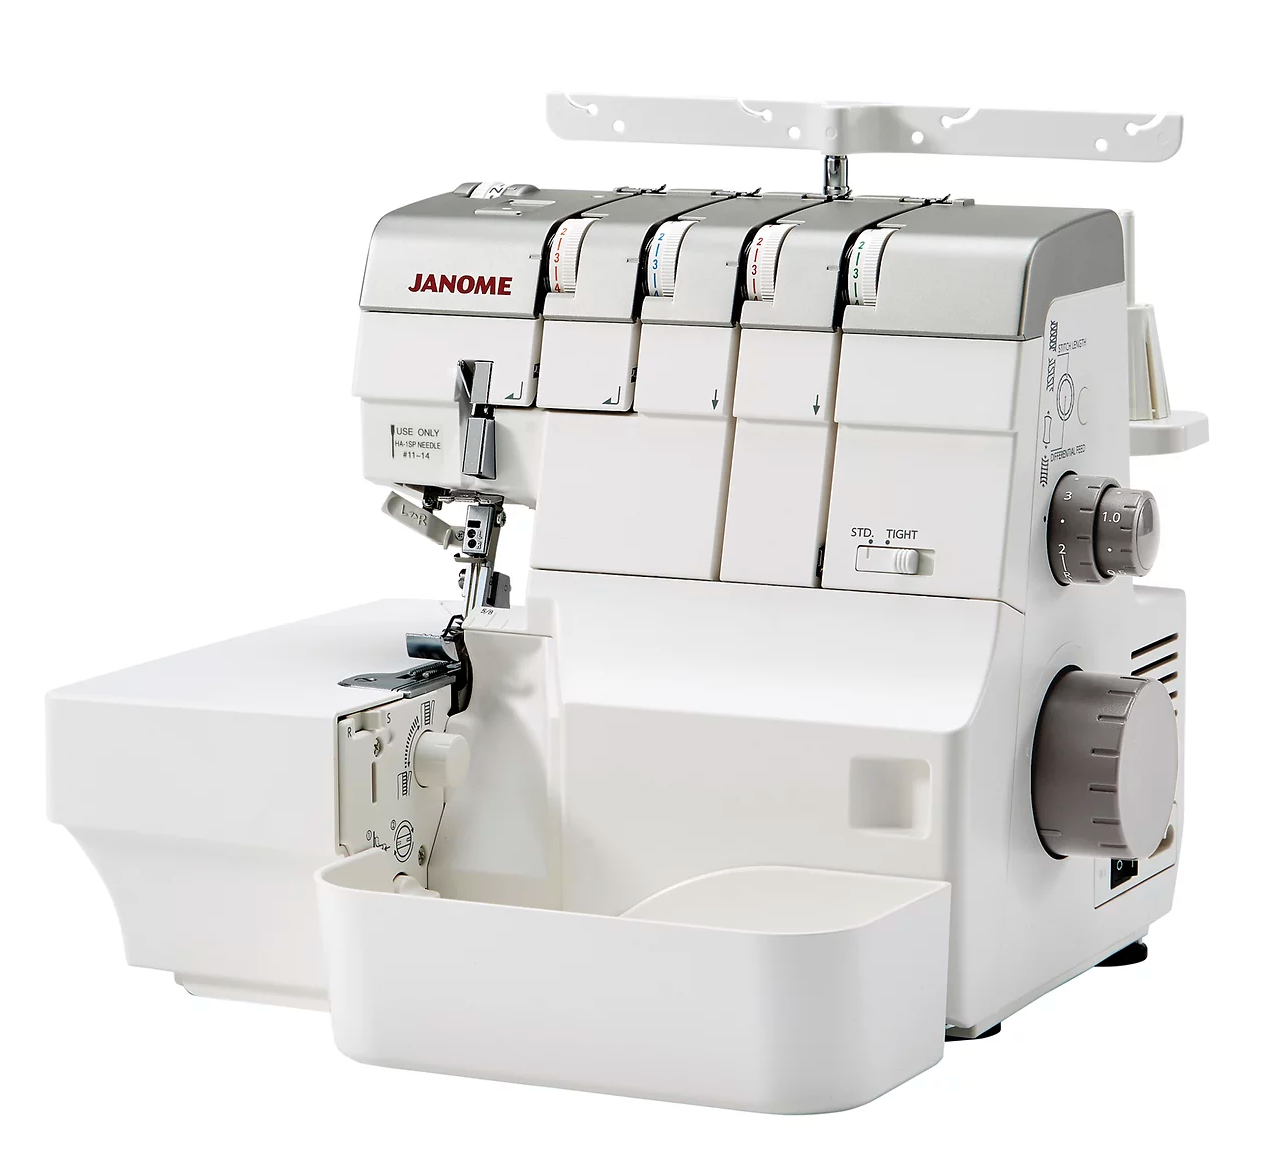 Janome AT2000D Professional